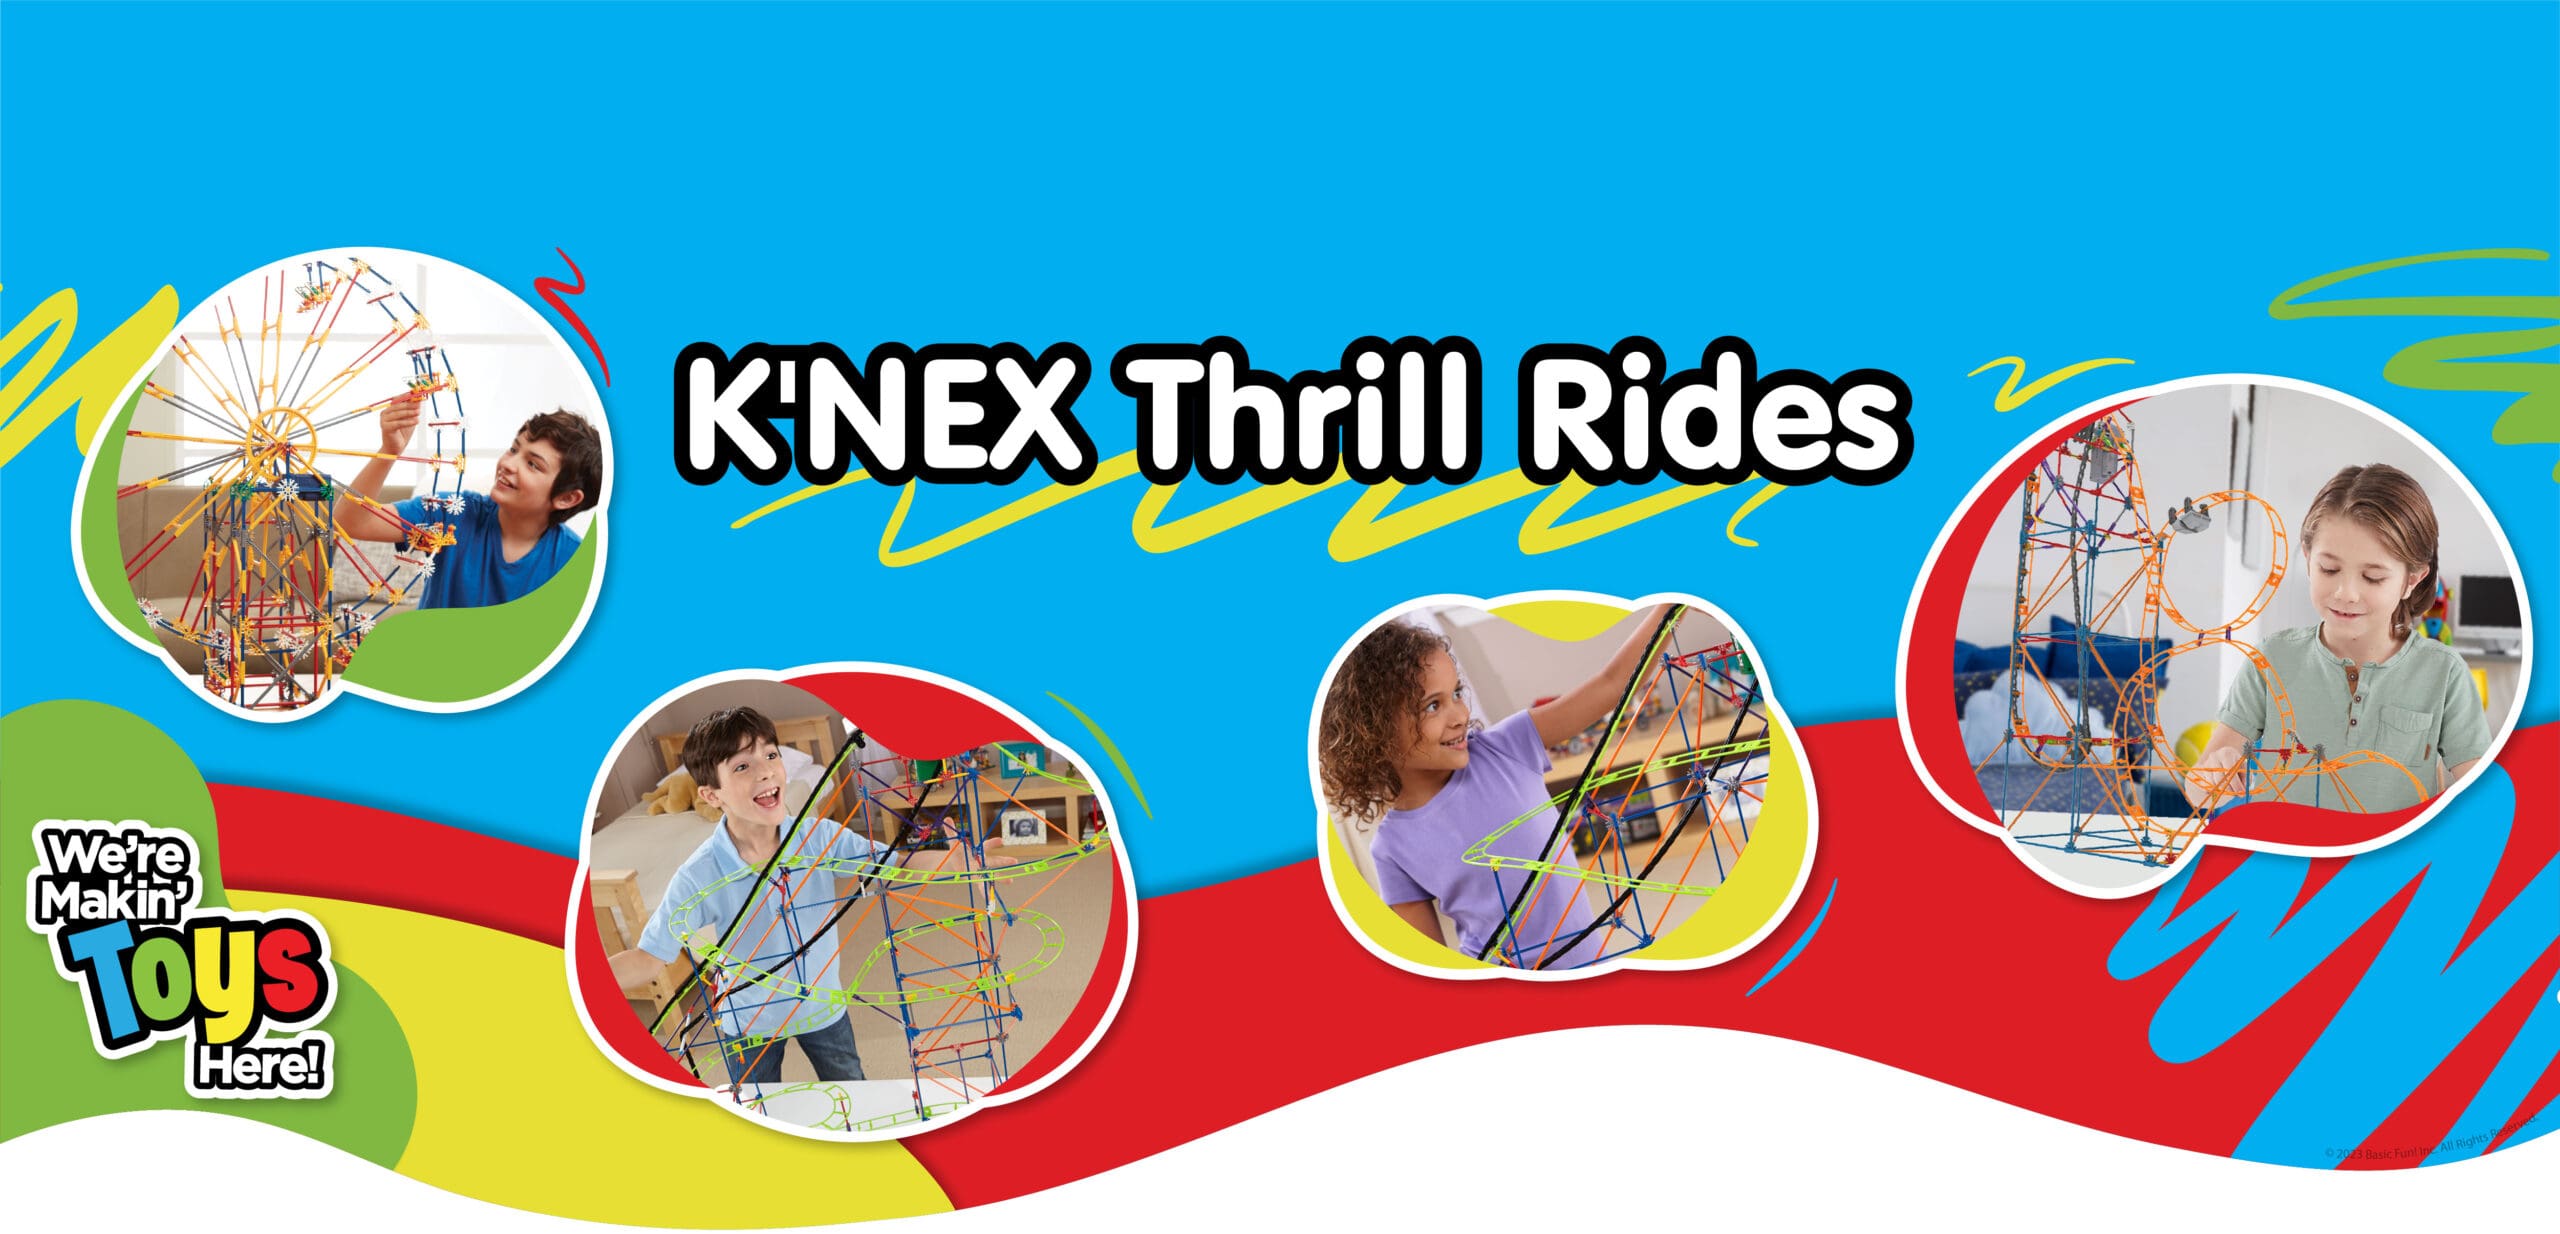 K'NEX Thrill Rides featuring kids playing with toys